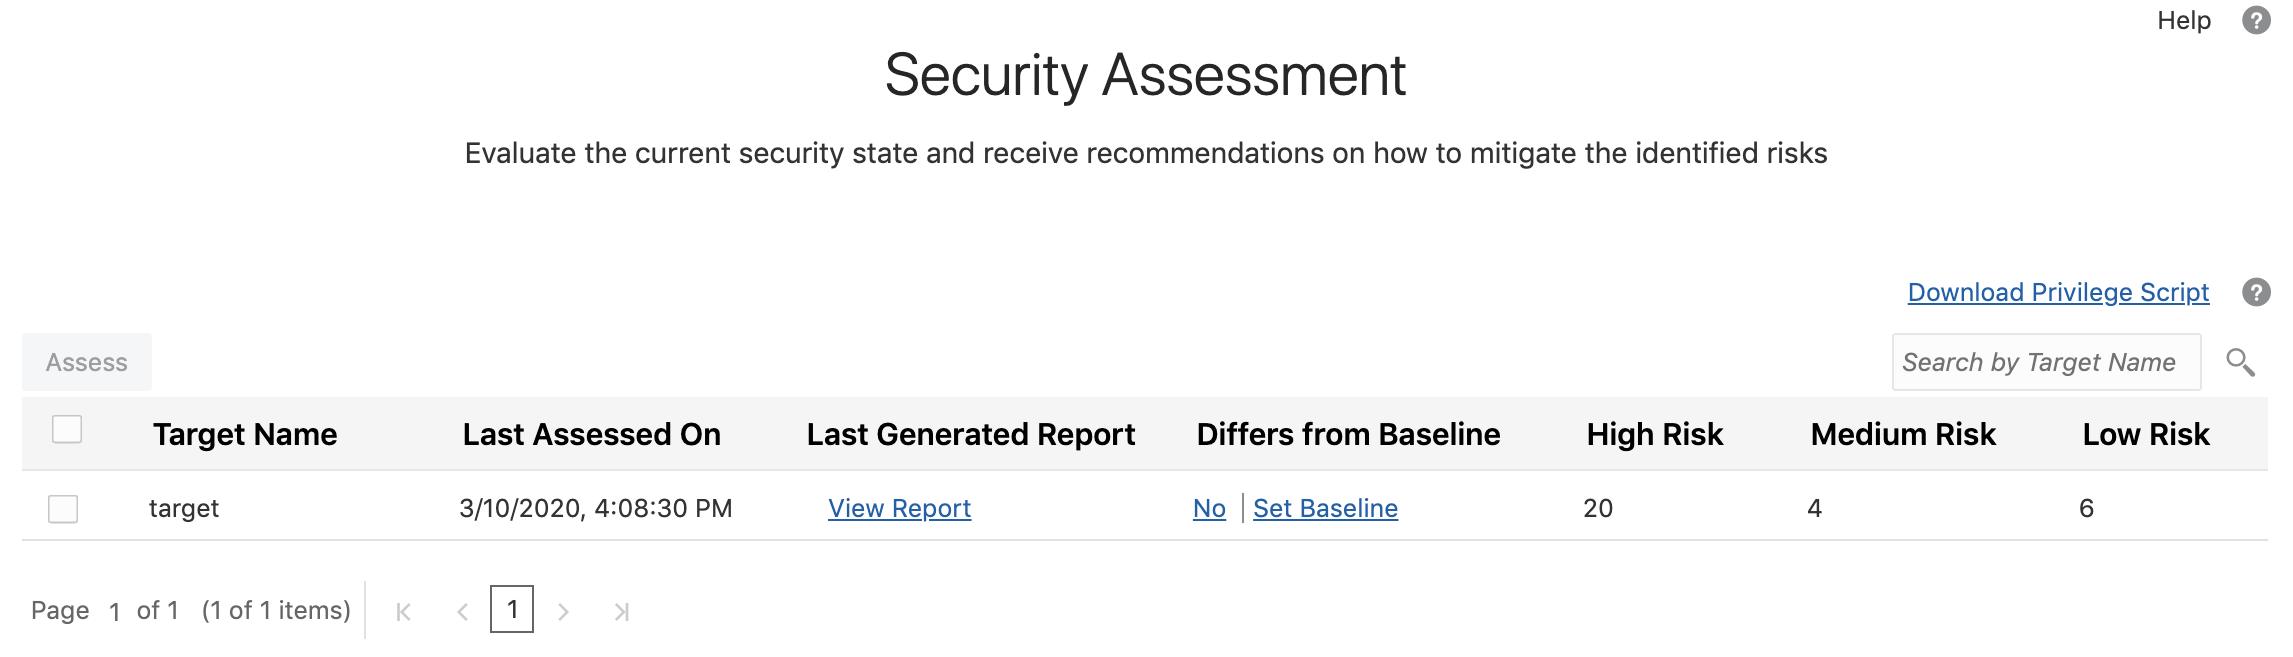 Security Assessment page showing that the current security assessment report does not differ from the baseline report.